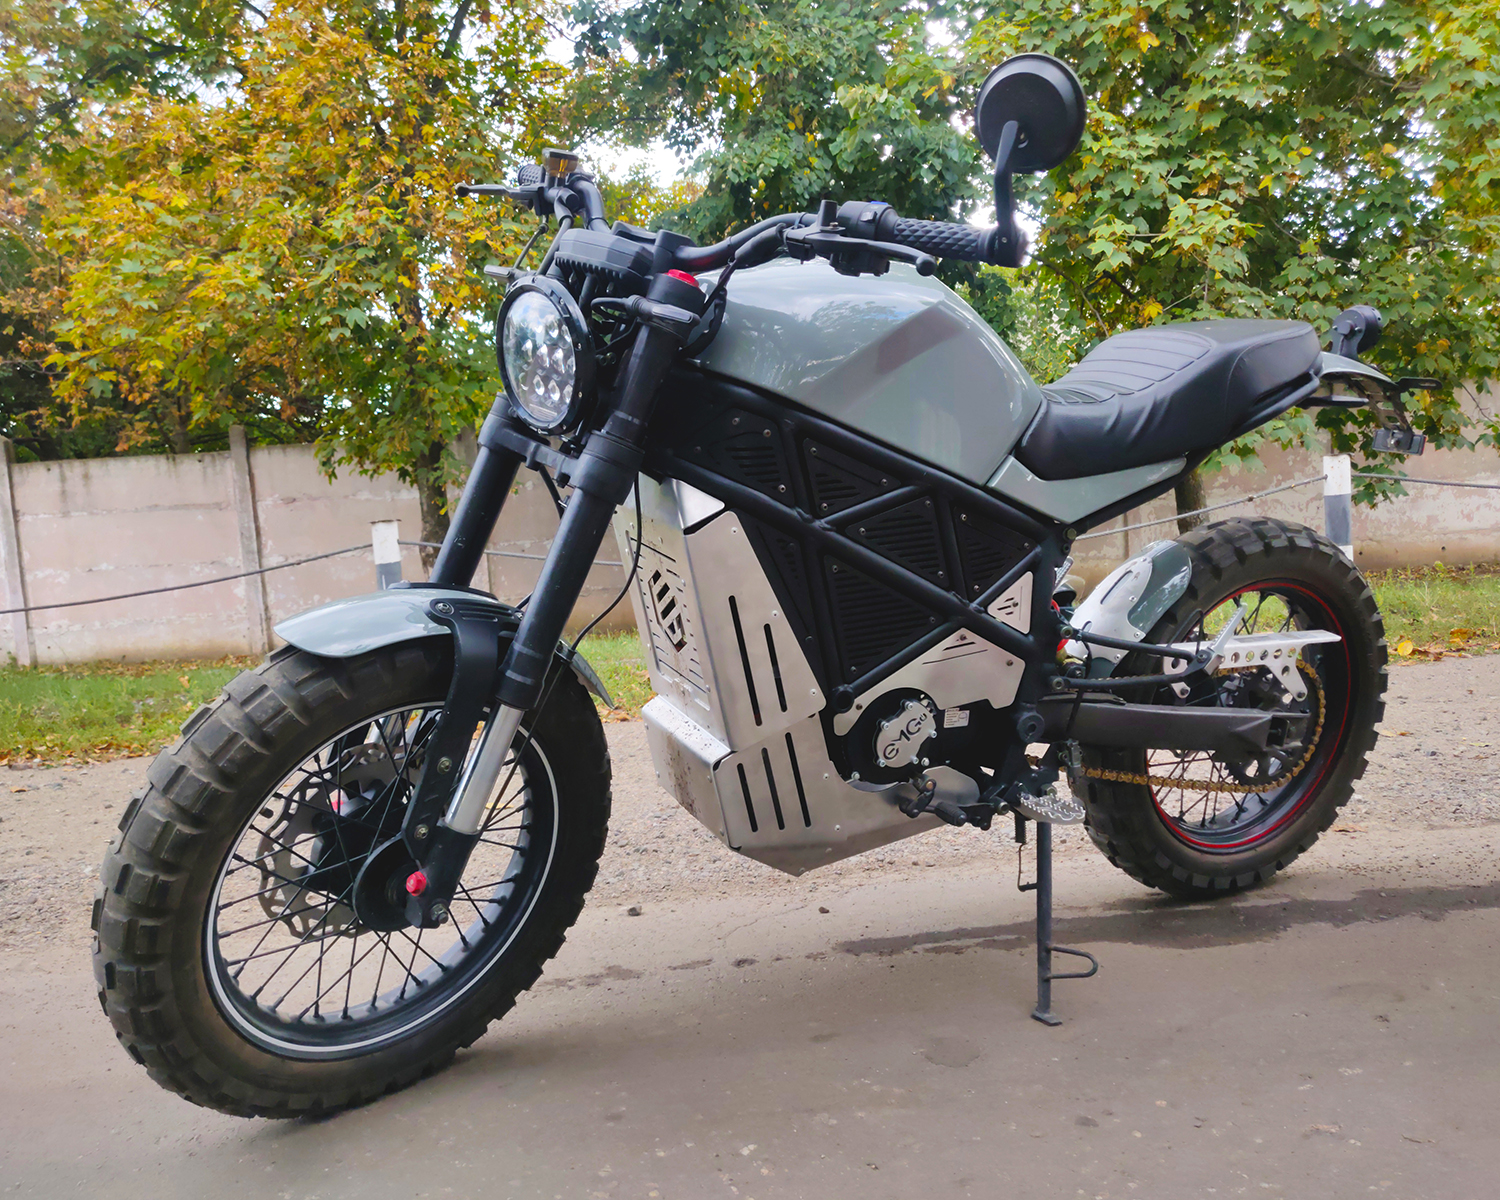 A side view of the ScrAmper - an electric motorcycle from Ukranian brand EMGo, capable of using an electric car charger